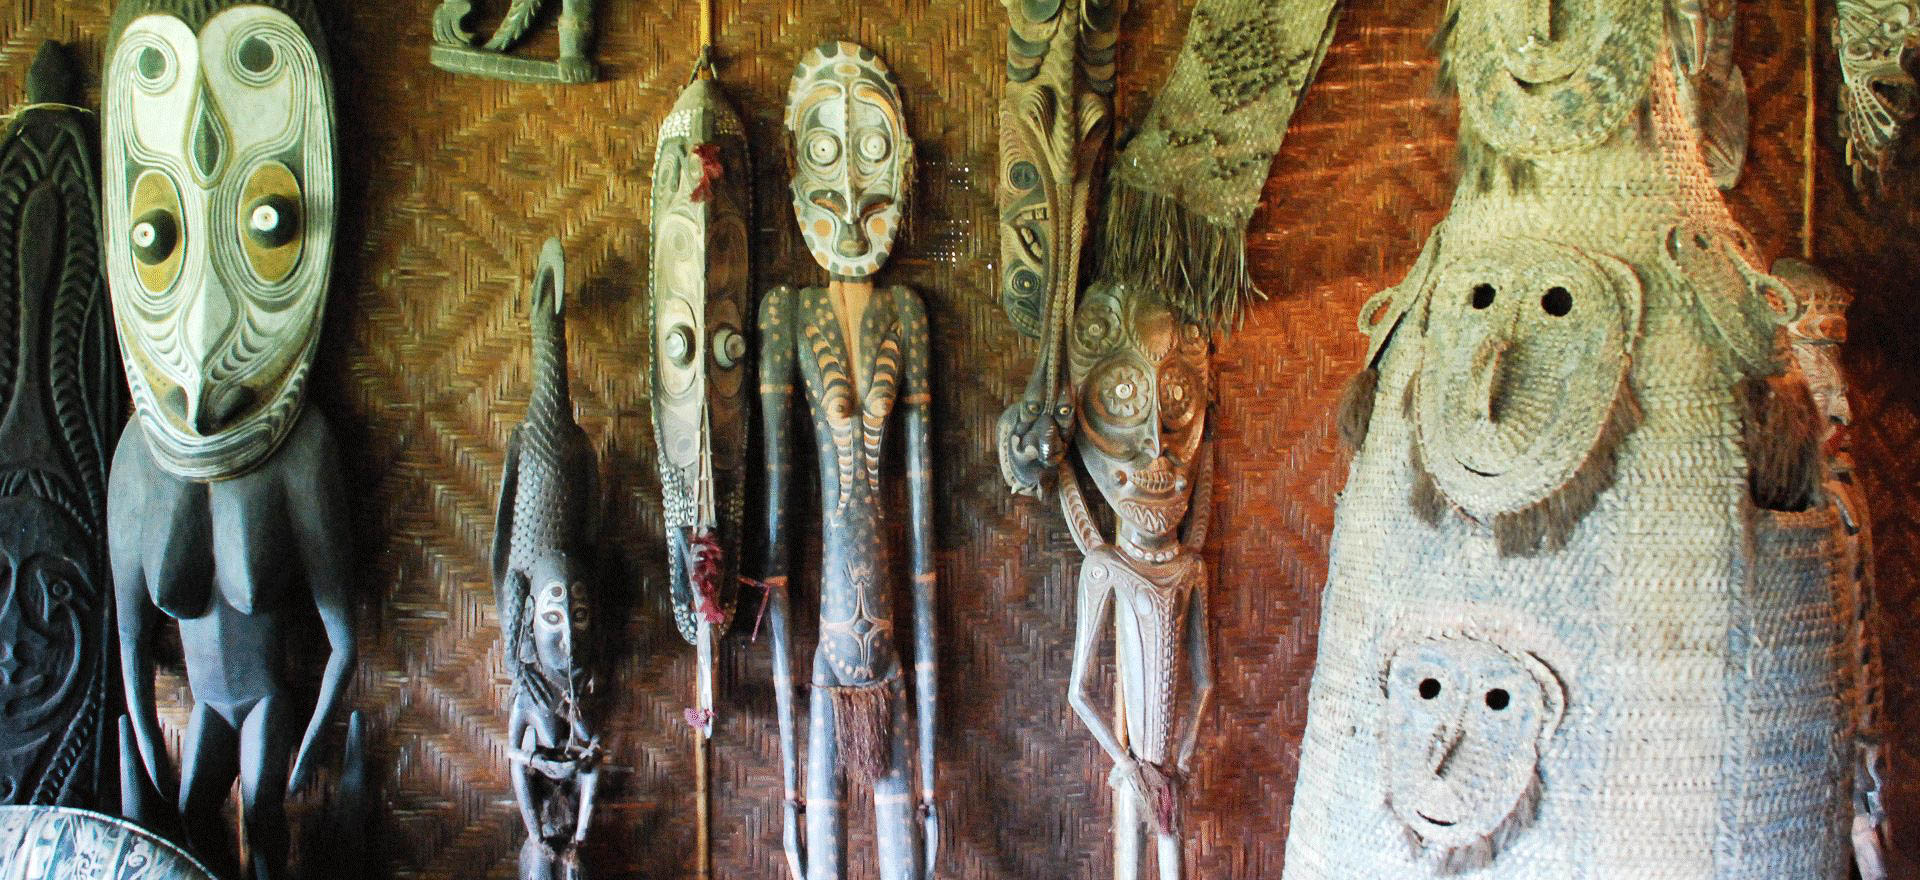 Carved masks and figures - Papua New Guinea holidays and tours